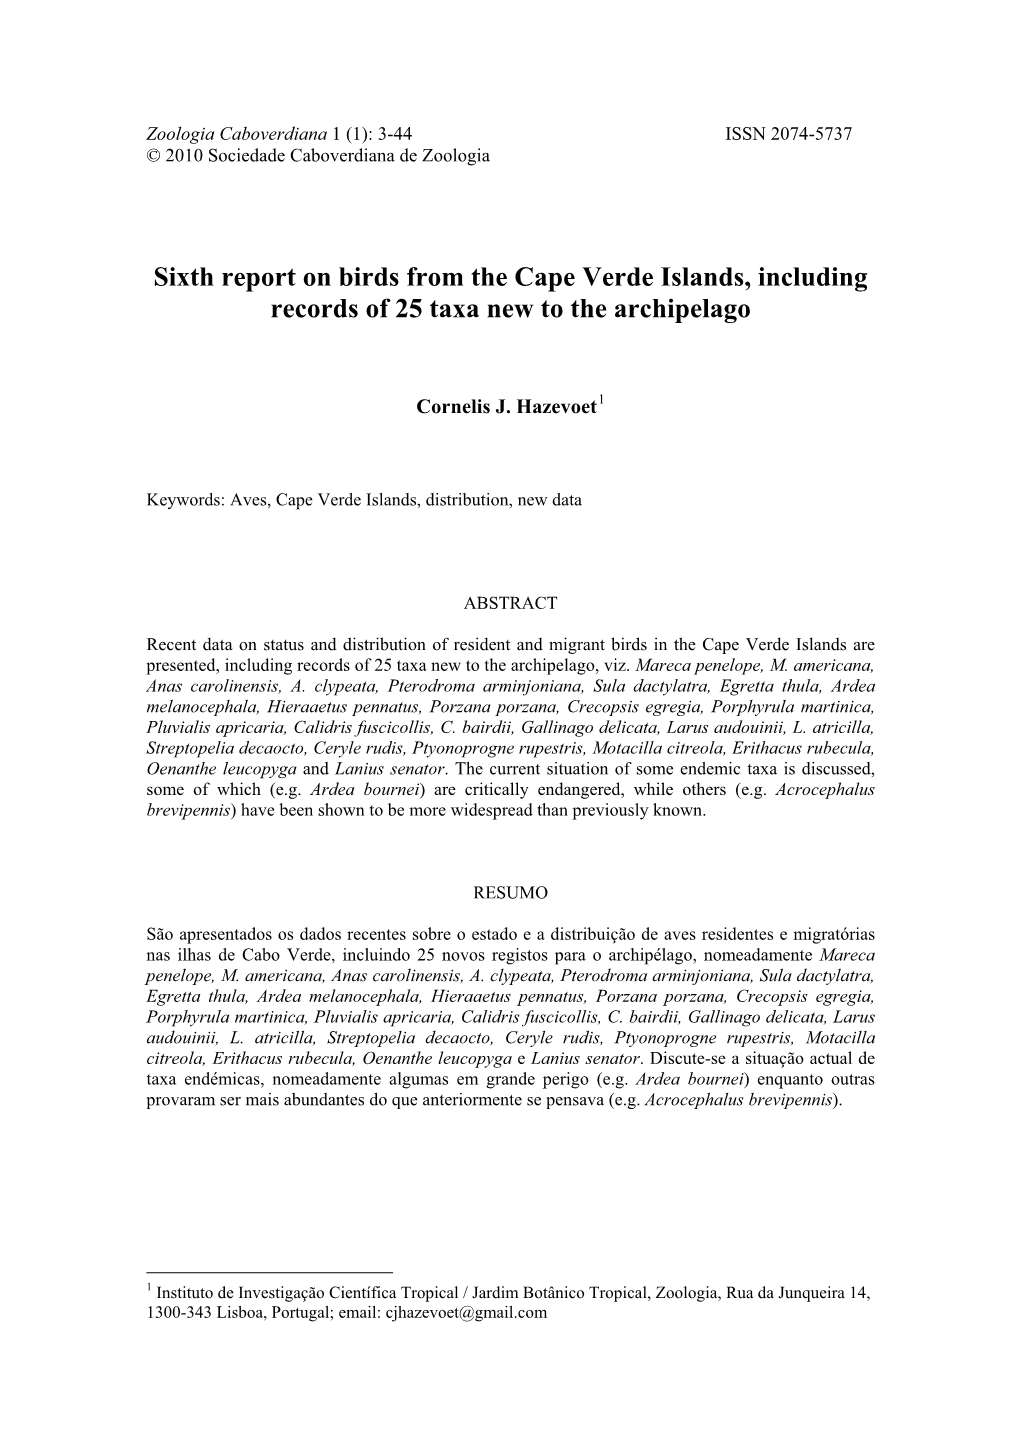 Sixth Report on Birds from the Cape Verde Islands, Including Records of 25 Taxa New to the Archipelago